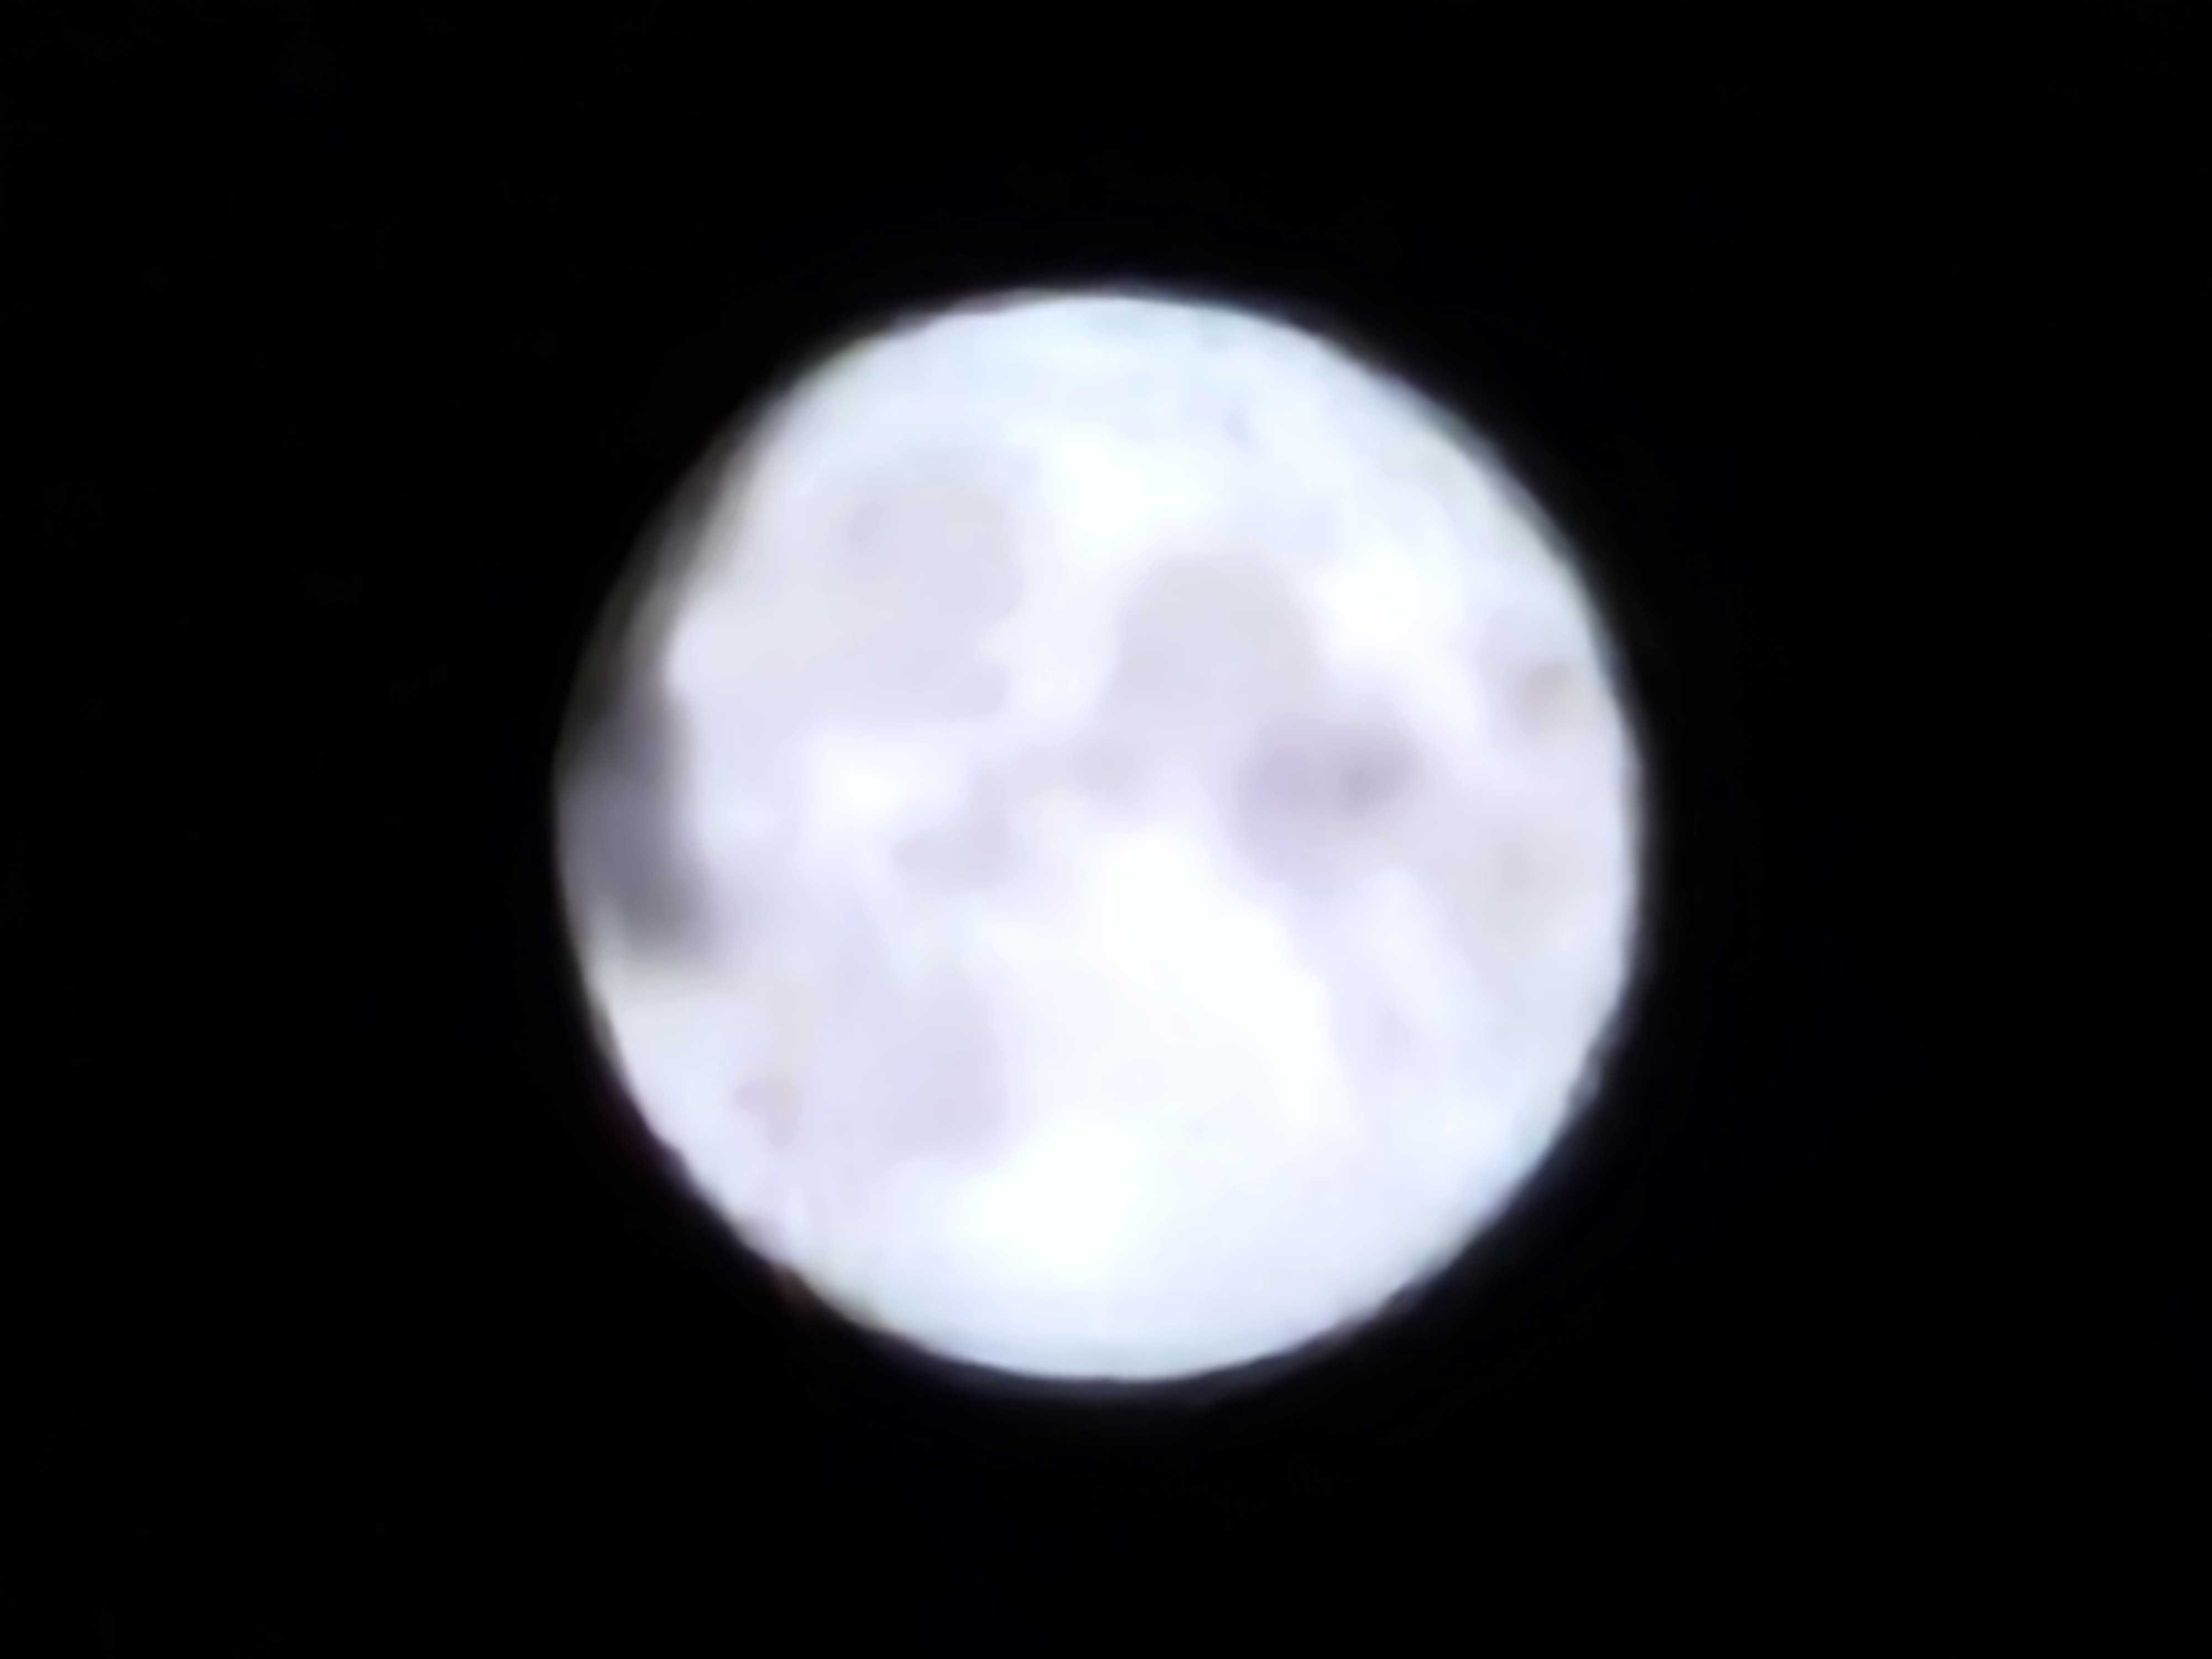 A photo of an artificially blurred image of a moon taken on the Galaxy S23 Ultra at 100x magnification, designed to prove whether or not Samsung's photo processing is "faking" the image